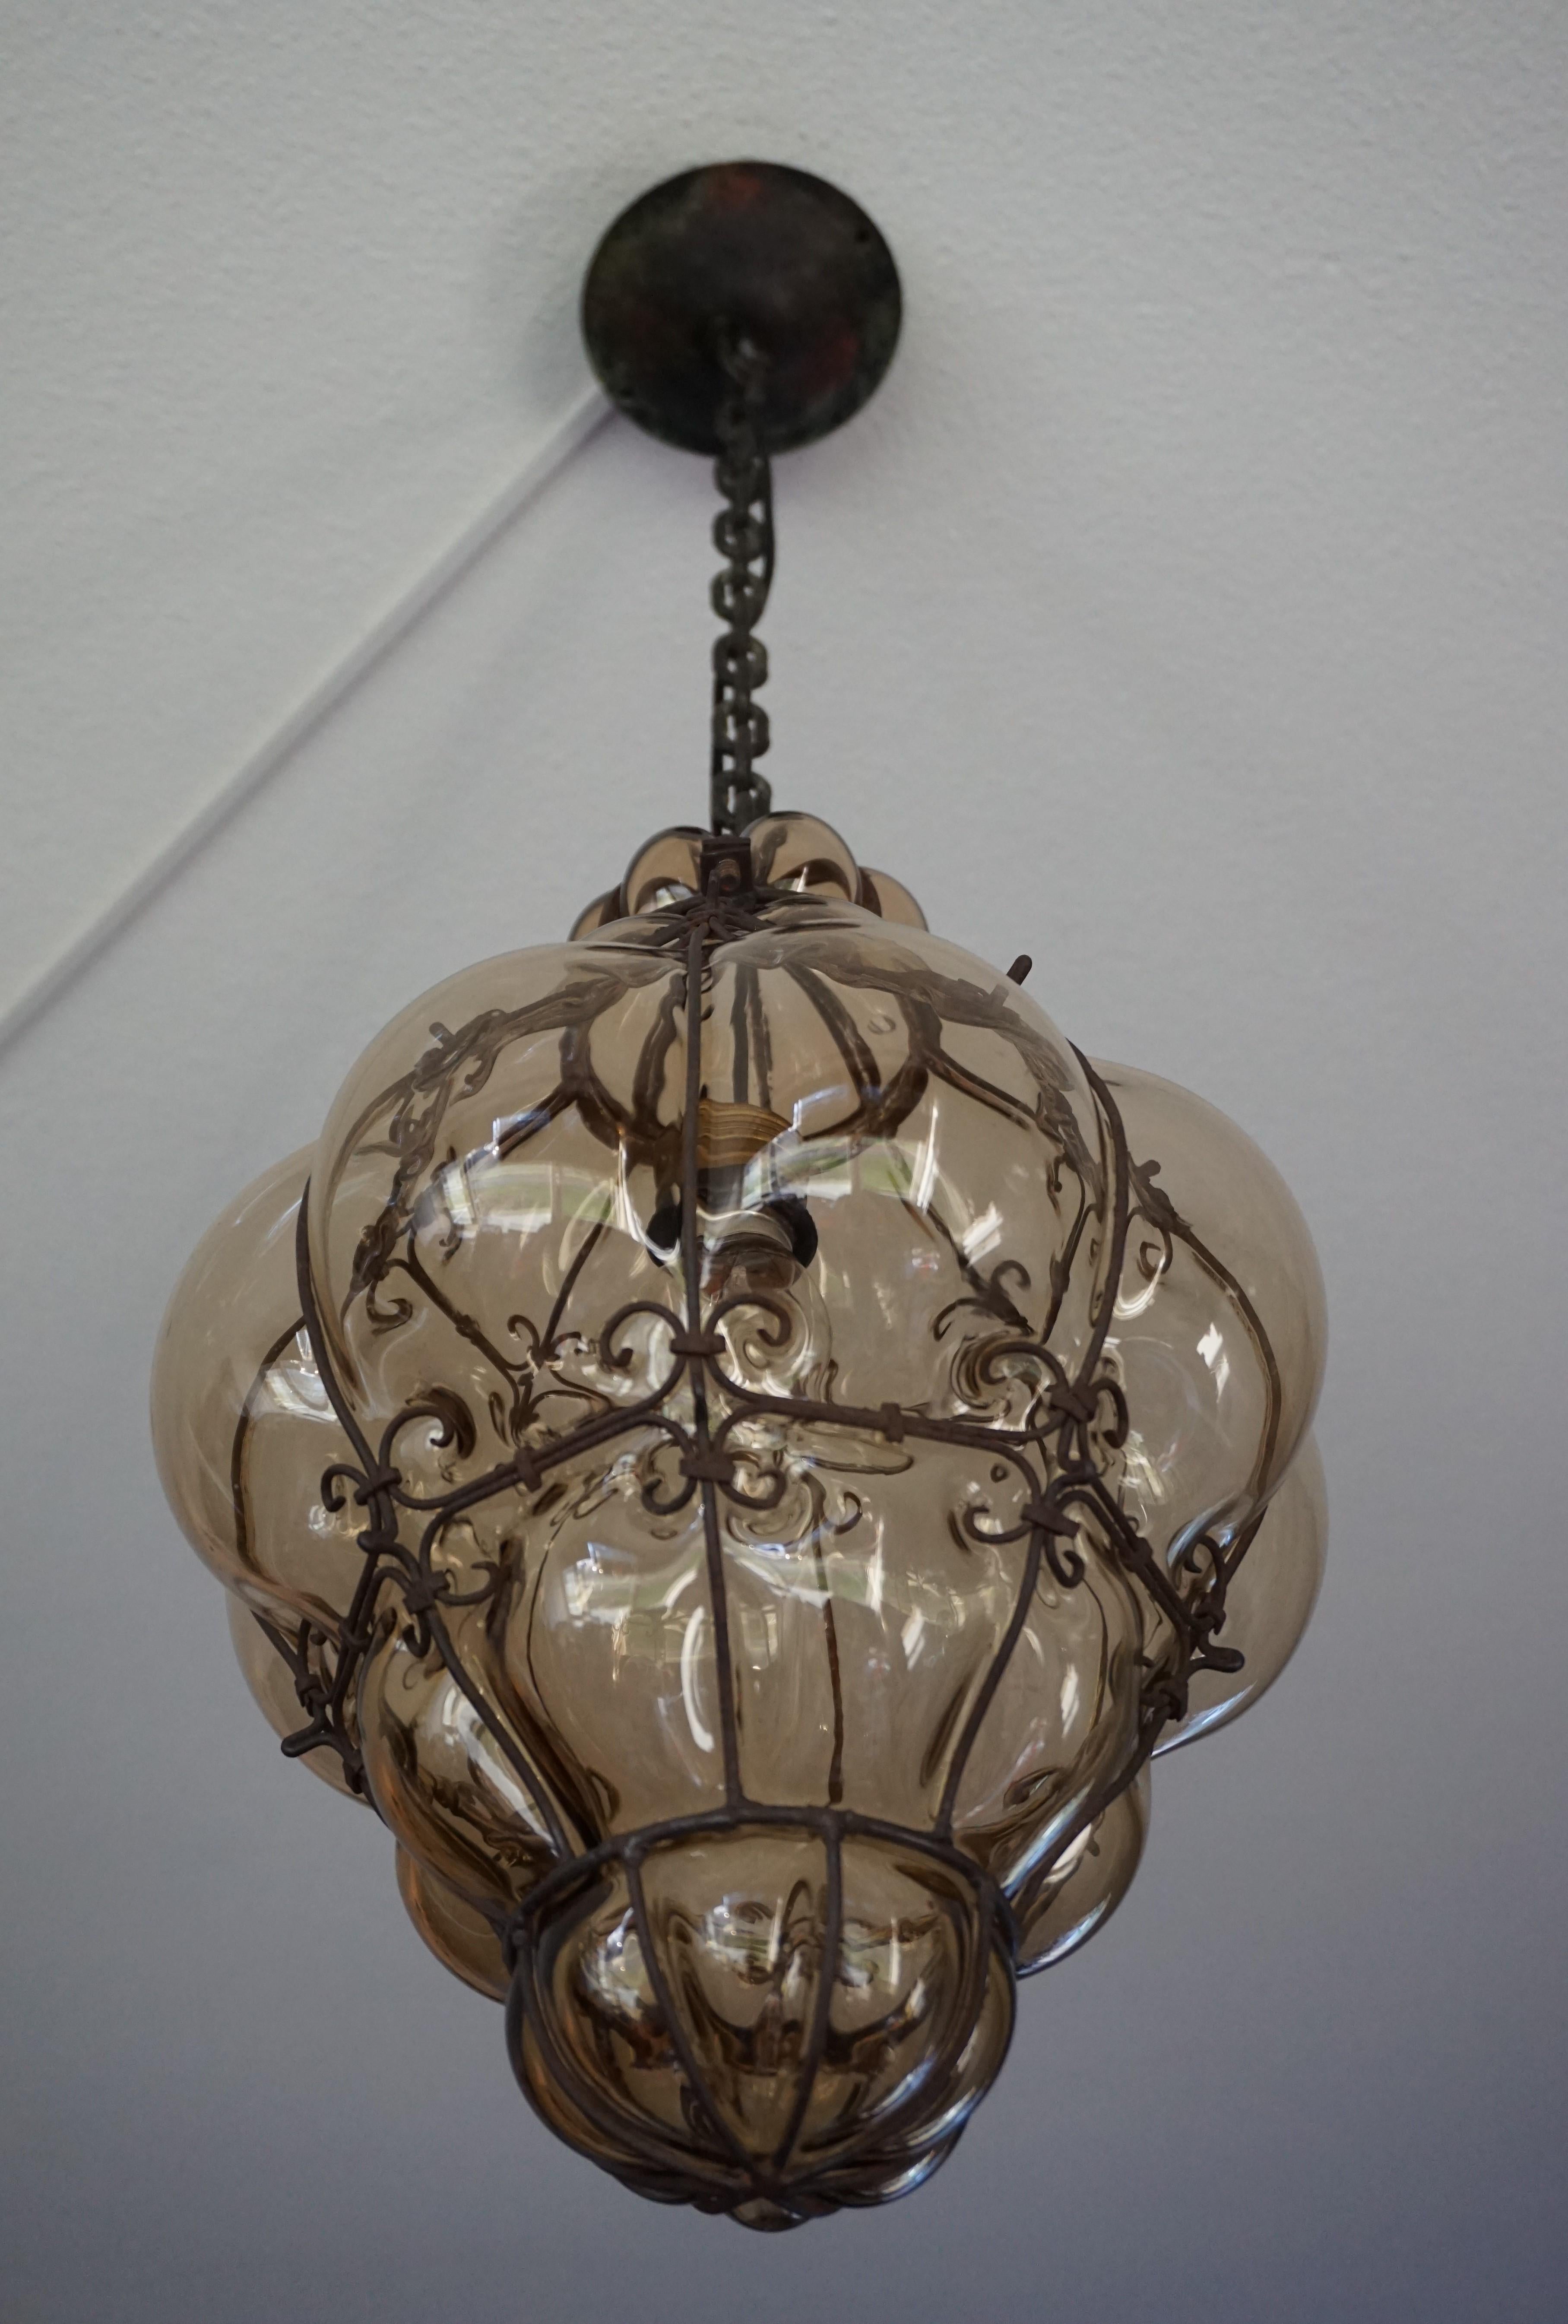 Wonderful and practical size antique pendant.

If you are looking for a rare and stylish fixture to grace your home then this handmade antique specimen could be perfect. With early 20th century lighting as one of our specialties we were, again, very